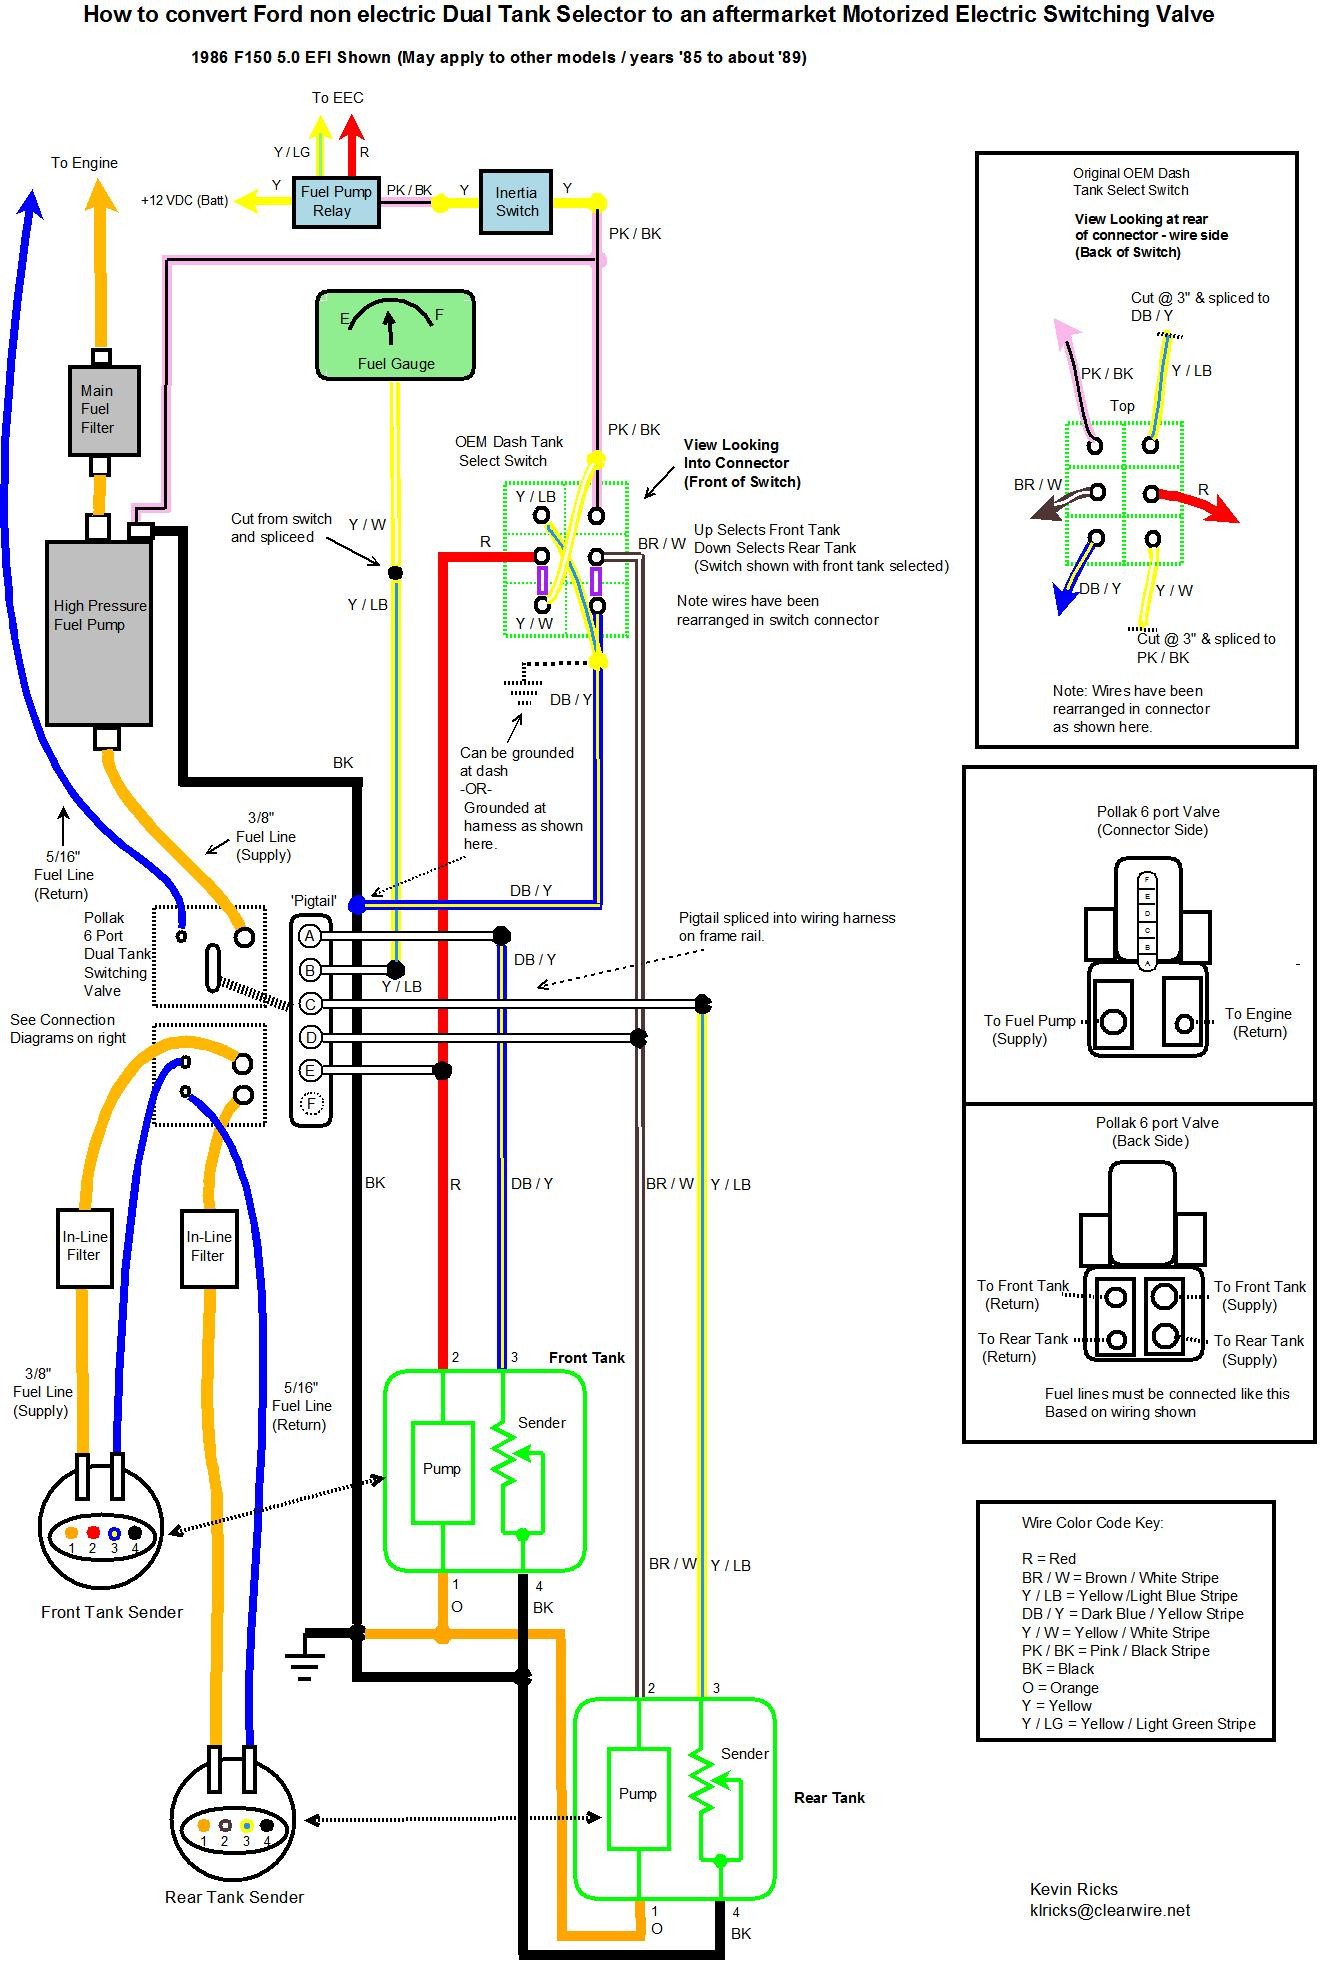 Labeled diagram fuel selector switch tank wiring